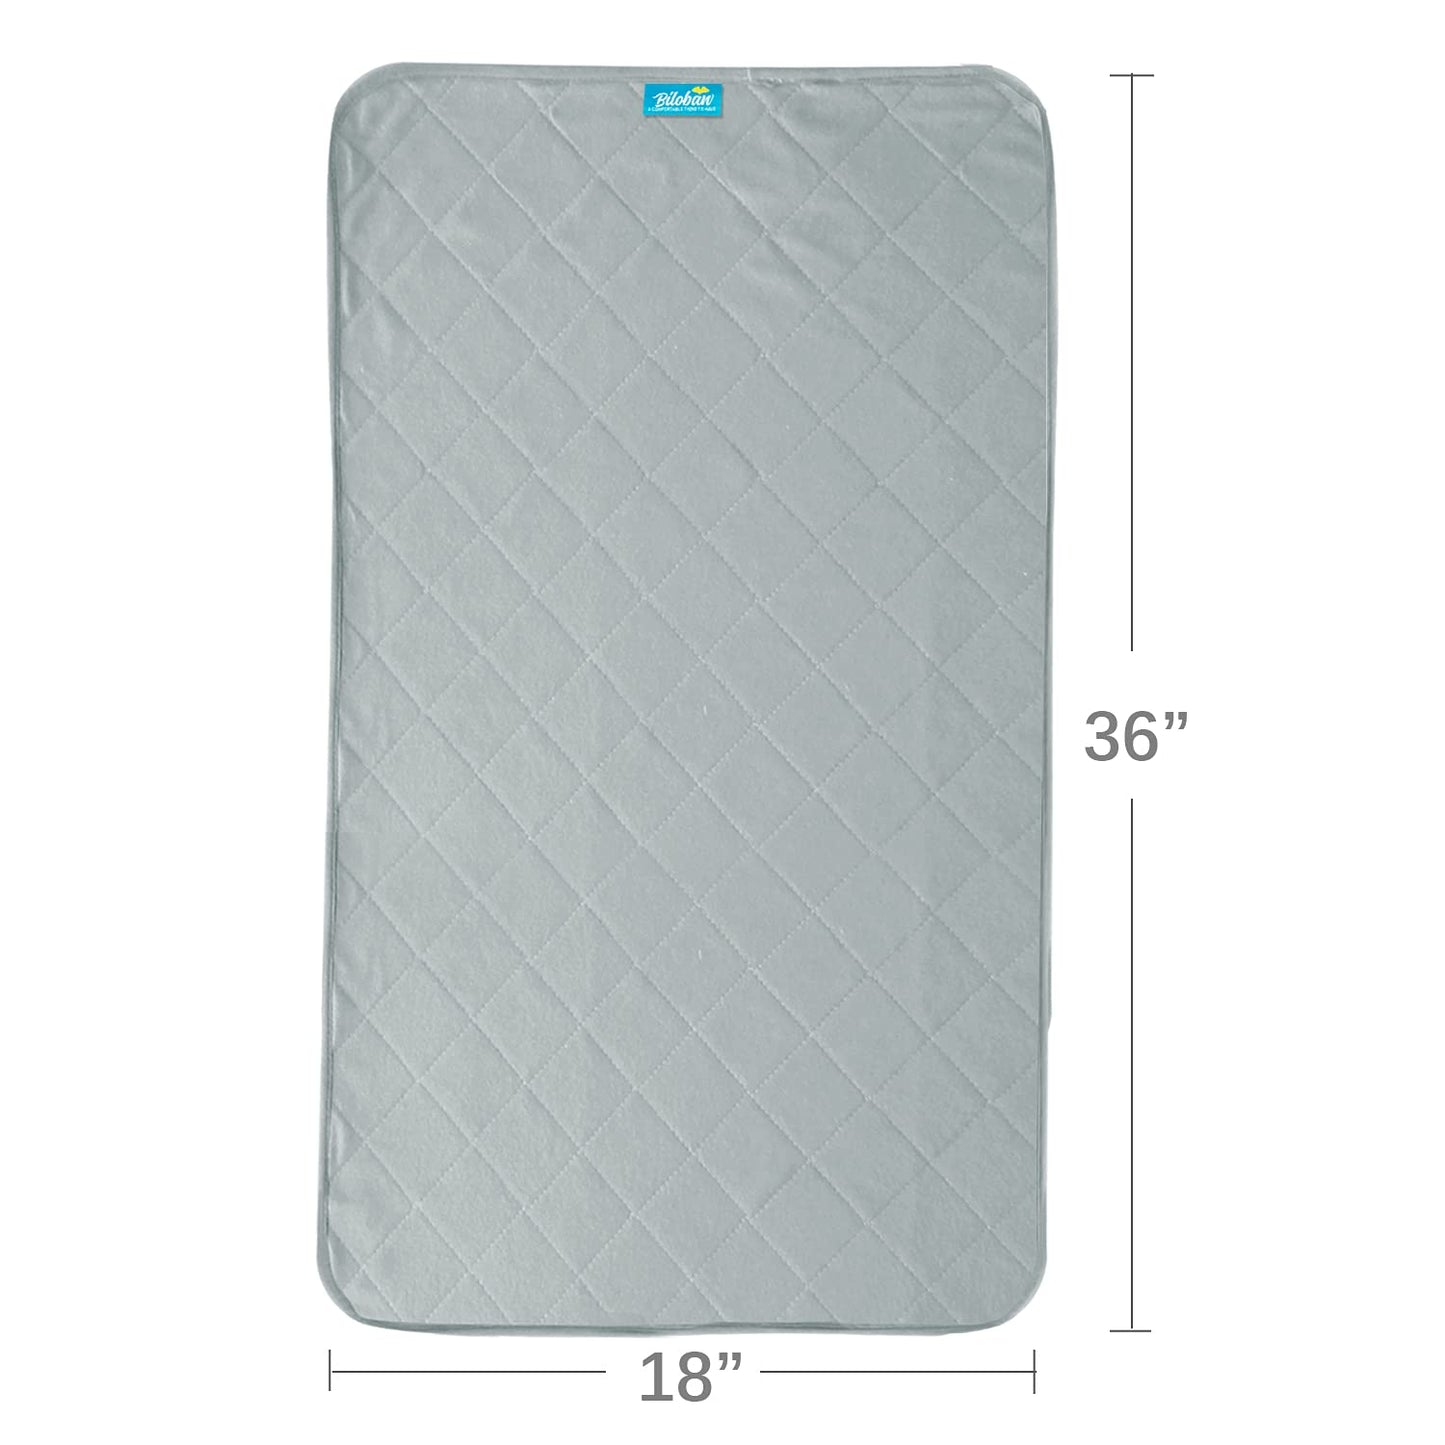 Waterproof Bed Pad/ Mat - Quilted Protector with Cotton Surface and Non-slip Back for Adults, Kids and Pets, Machine Washable, Grey